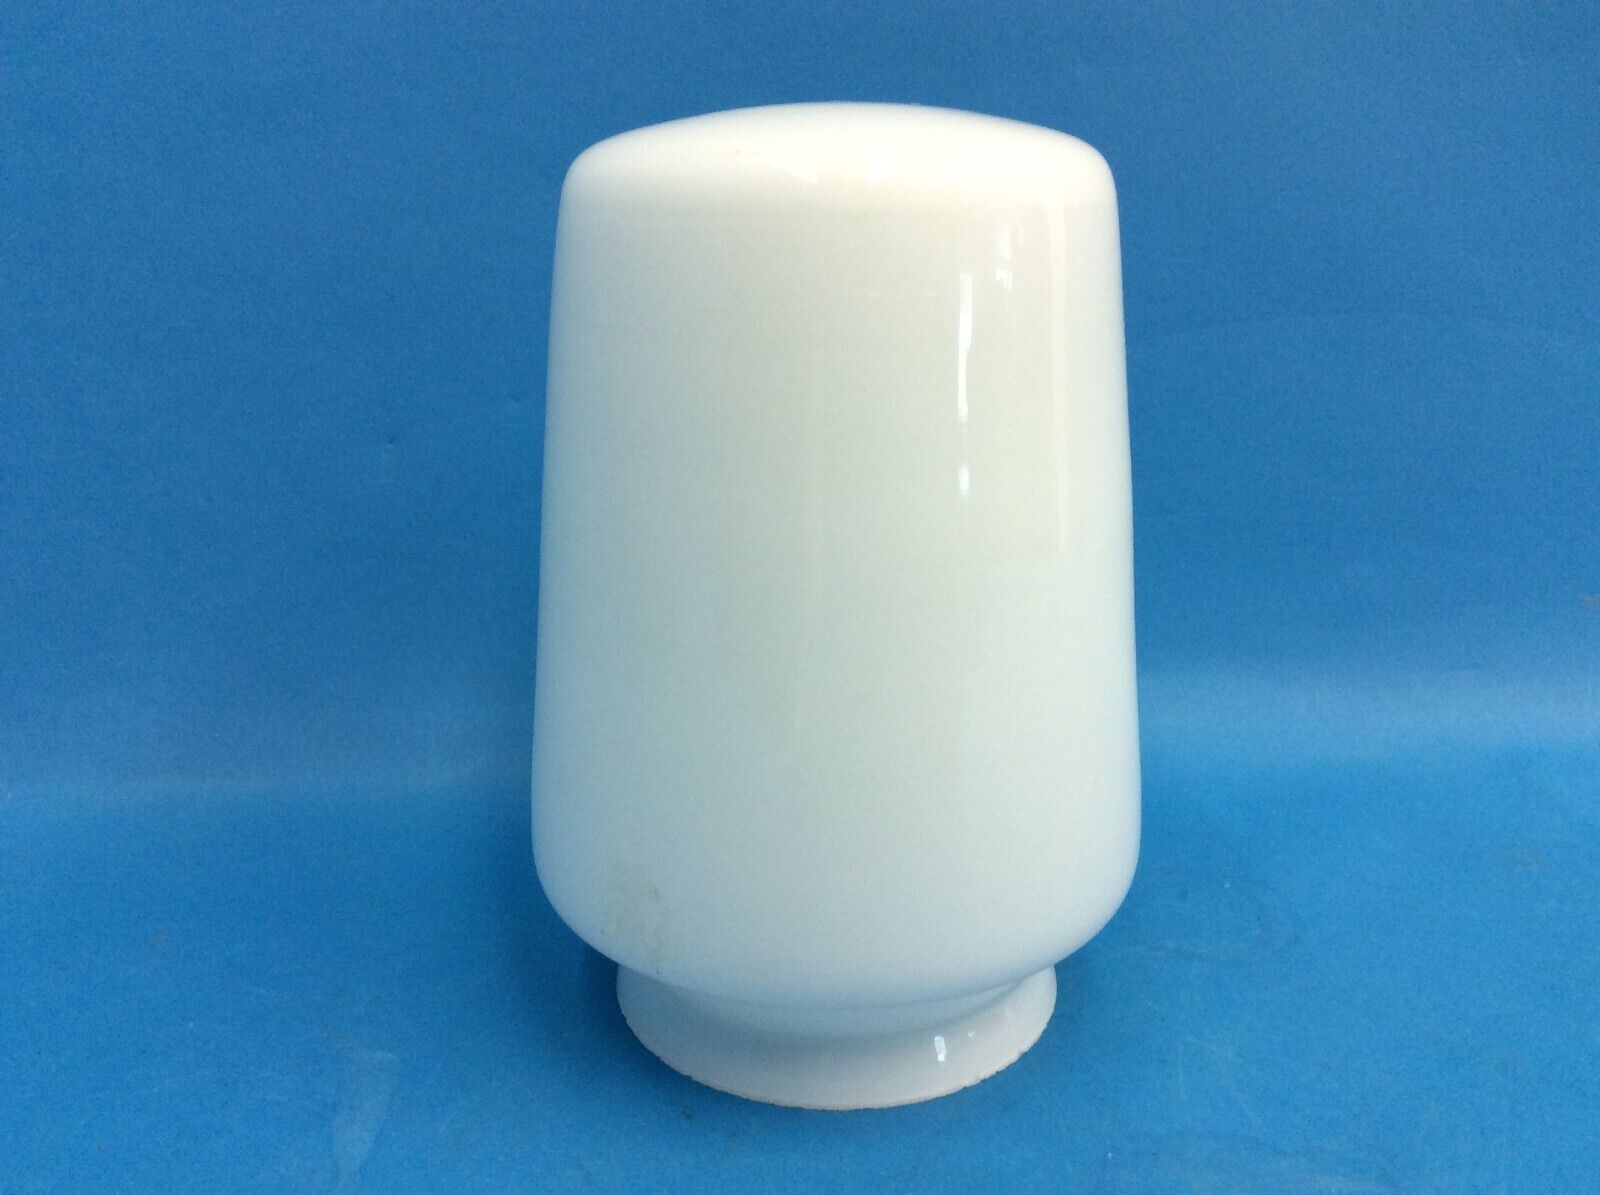 Single White Smooth Finish Rounded High Quality Fixture Electric Lamp Shade Part